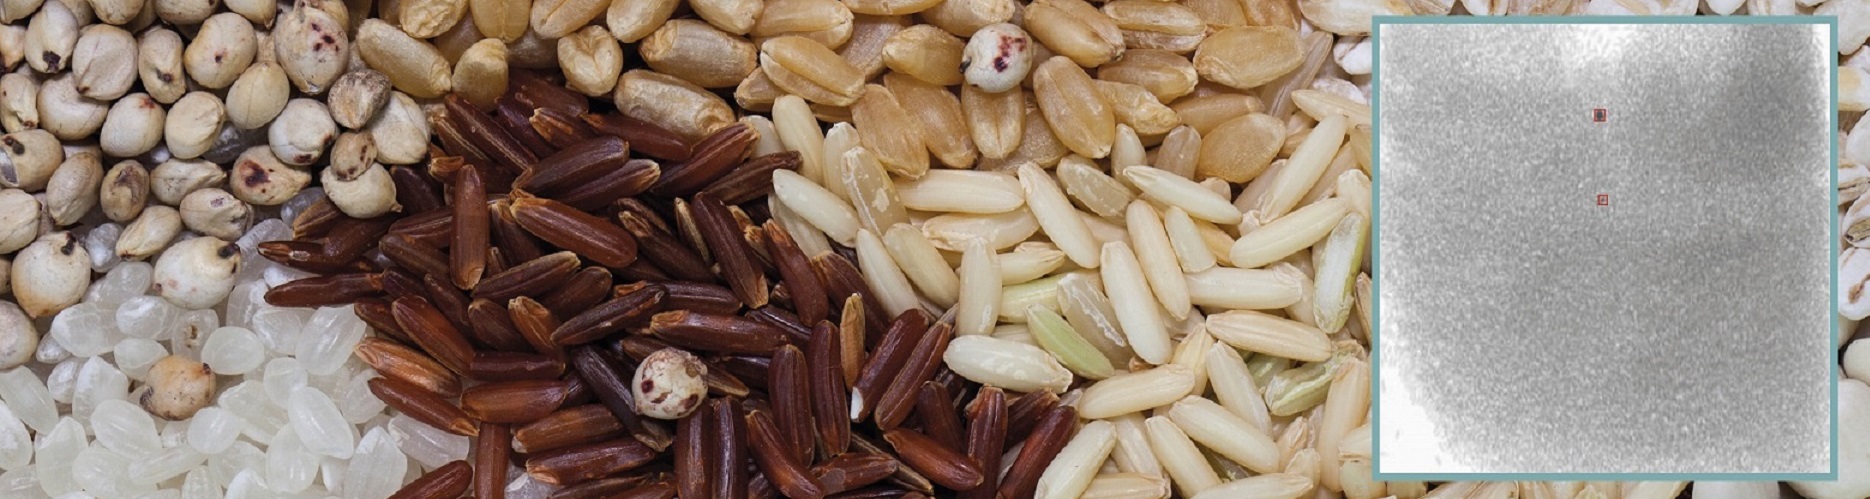 Foreign body detection in cereals